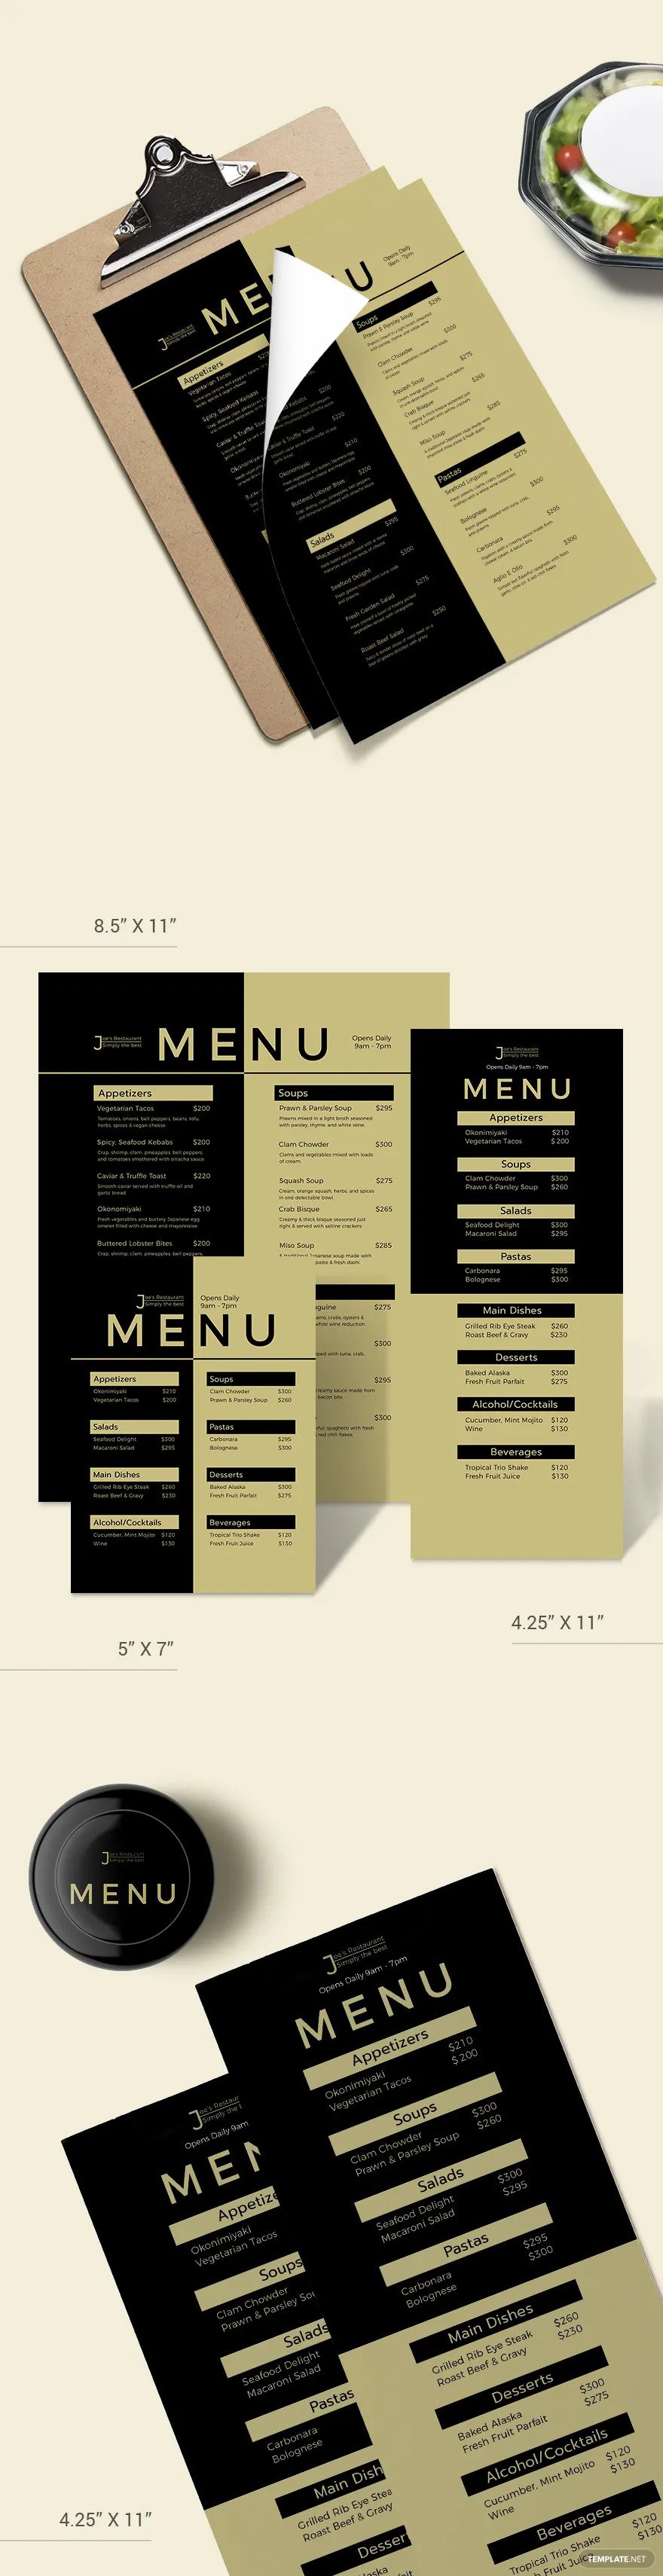 dinner-menu-ideas-and-examples